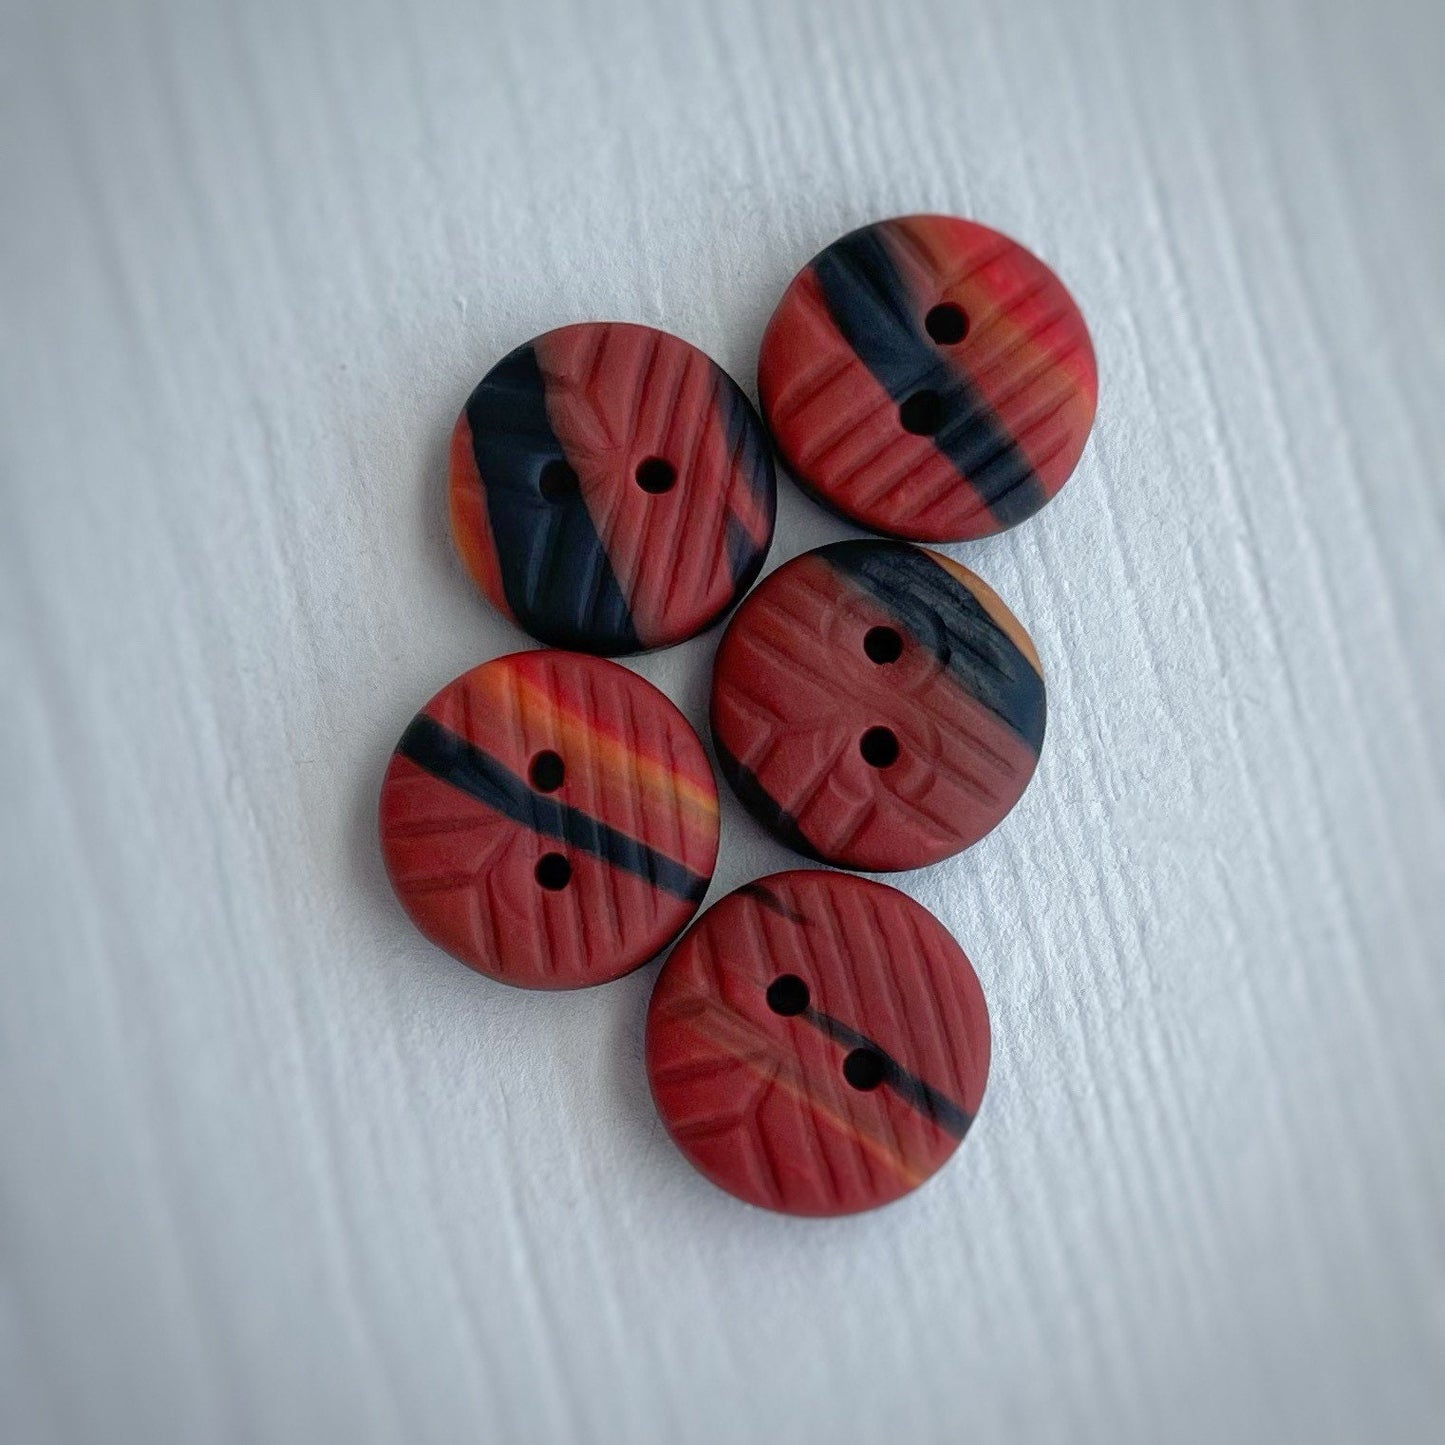 Small ~12mm Red, orange and black polymer clay buttons with impression - set of 5